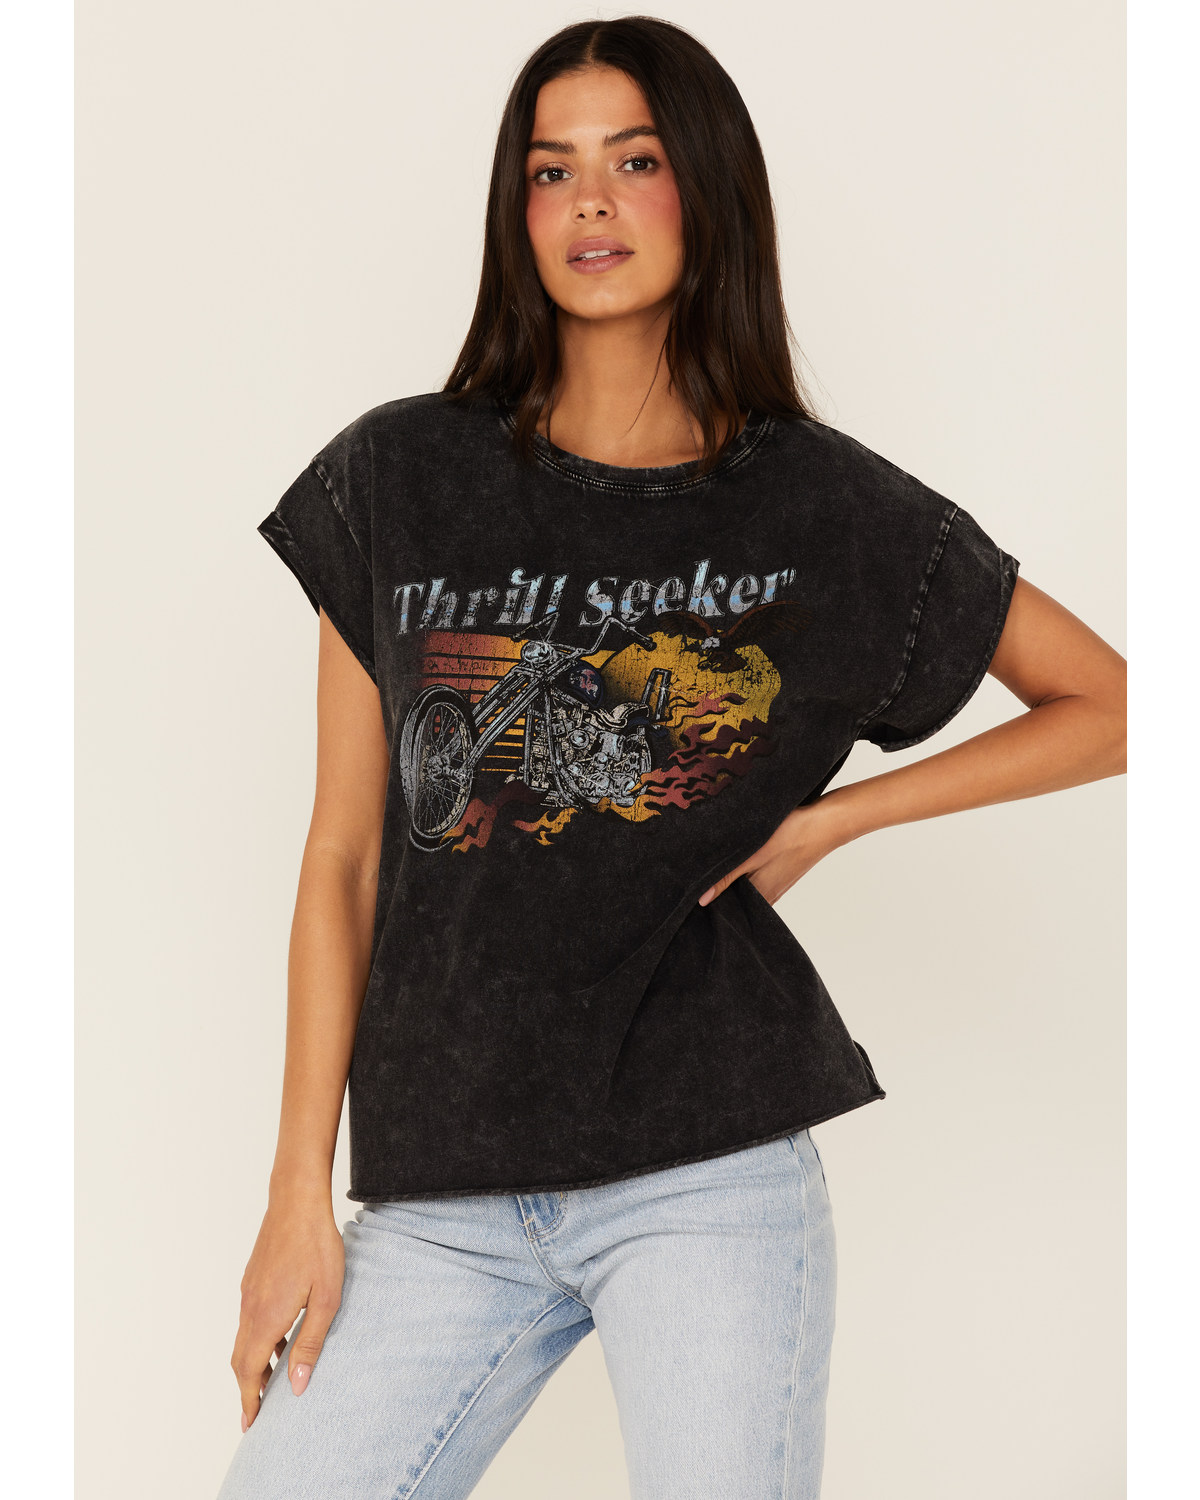 Cleo + Wolf Women's Thrill Seeker Moto Graphic Relaxed Tee